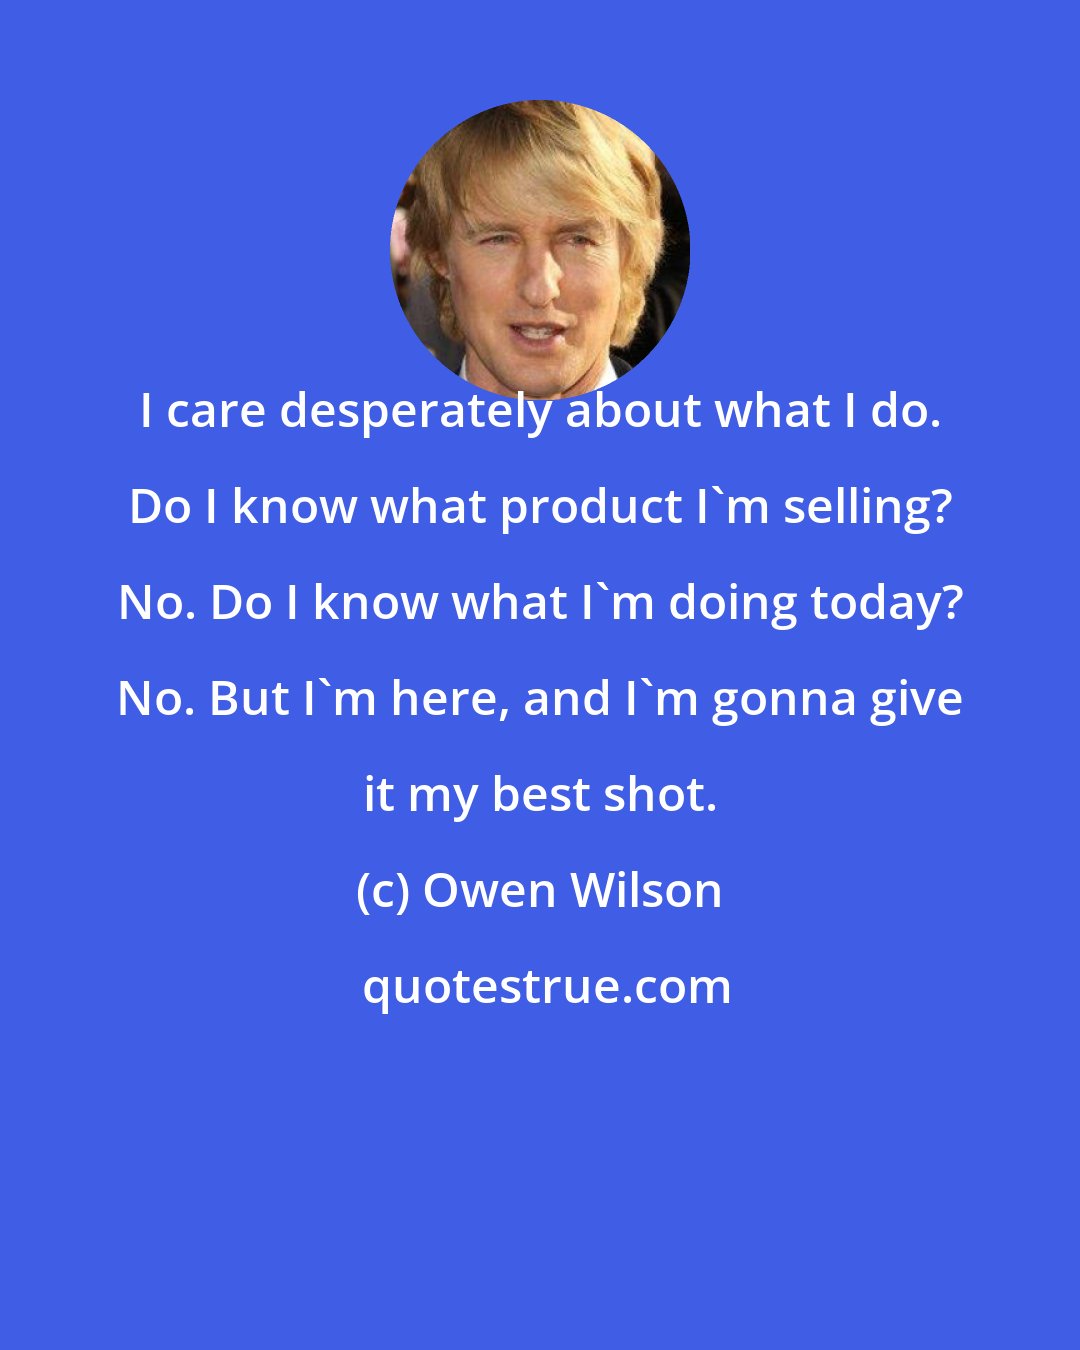 Owen Wilson: I care desperately about what I do. Do I know what product I'm selling? No. Do I know what I'm doing today? No. But I'm here, and I'm gonna give it my best shot.